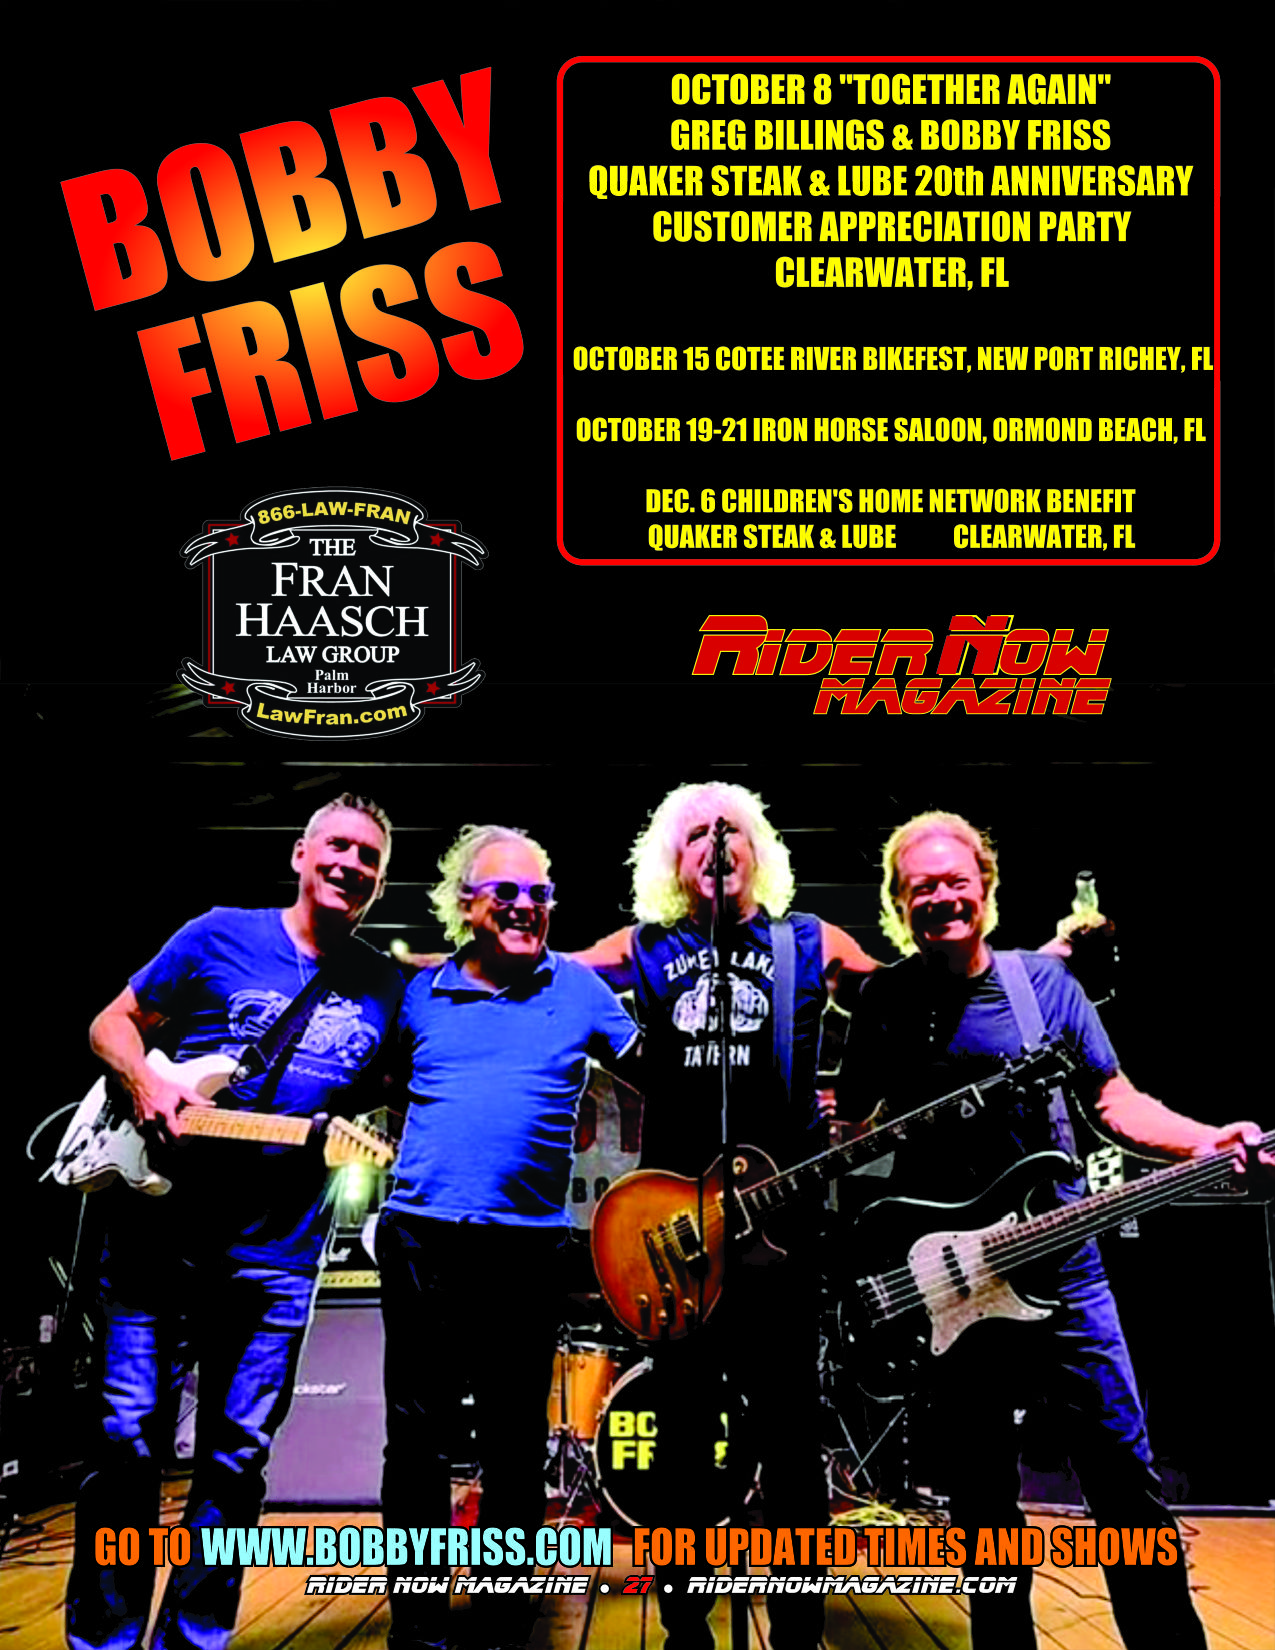 Bobby Friss Tour Schedule